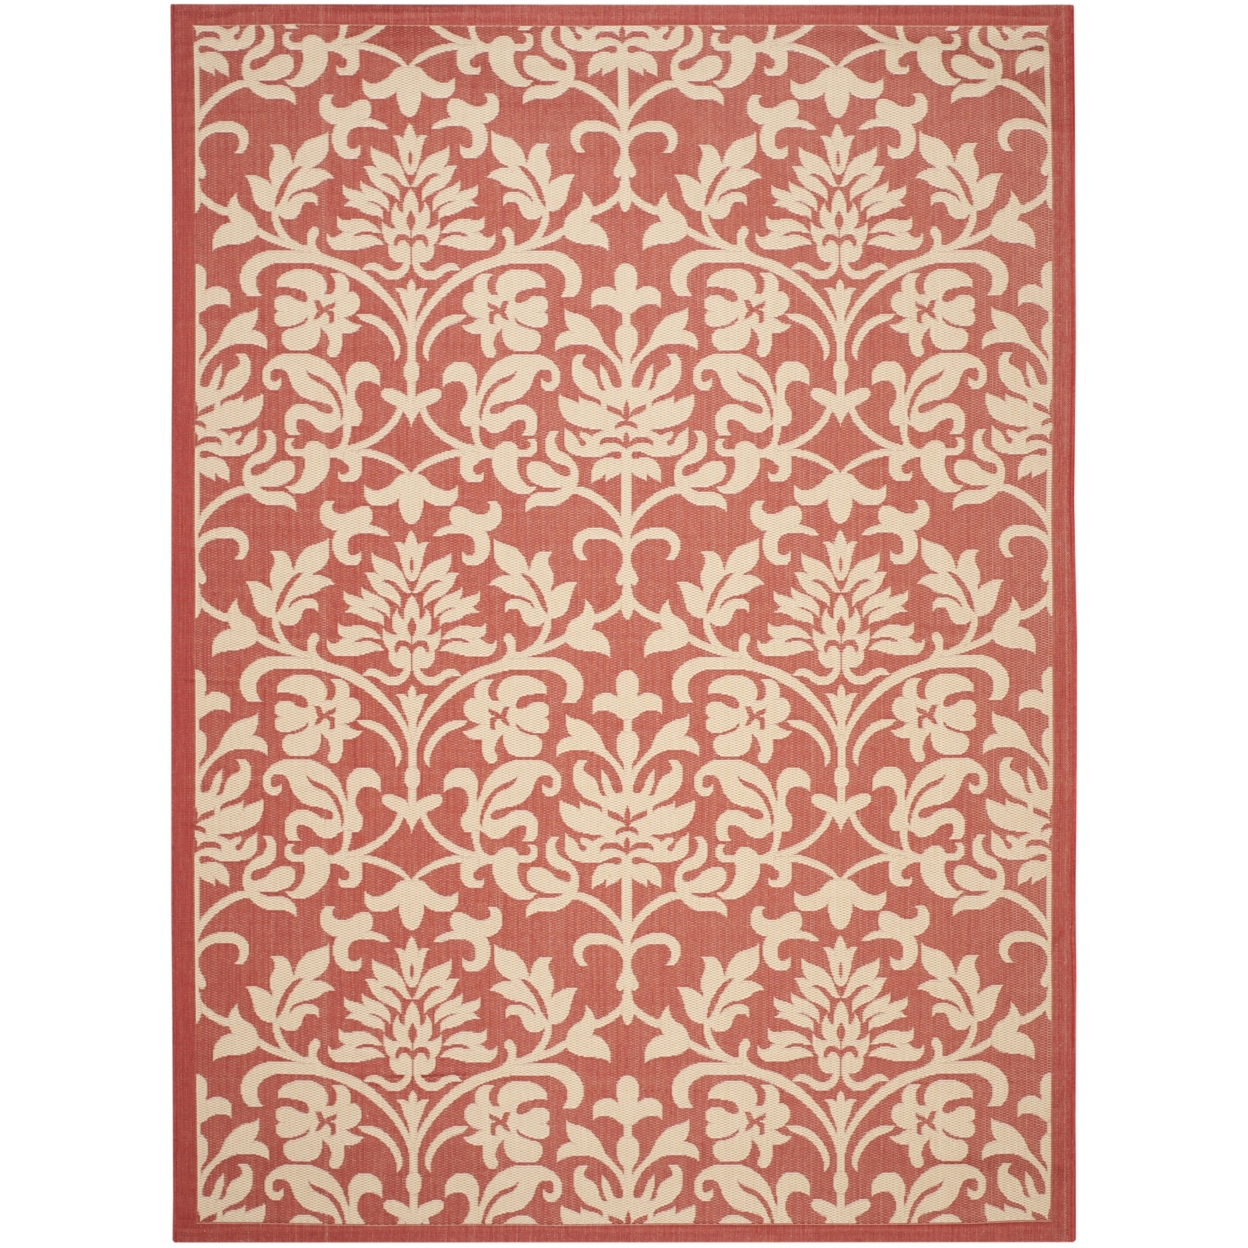 SAFAVIEH Courtyard Yvette Floral Indoor/Outdoor Area Rug, 5'3" x 7'7", Red/Natural - image 4 of 10